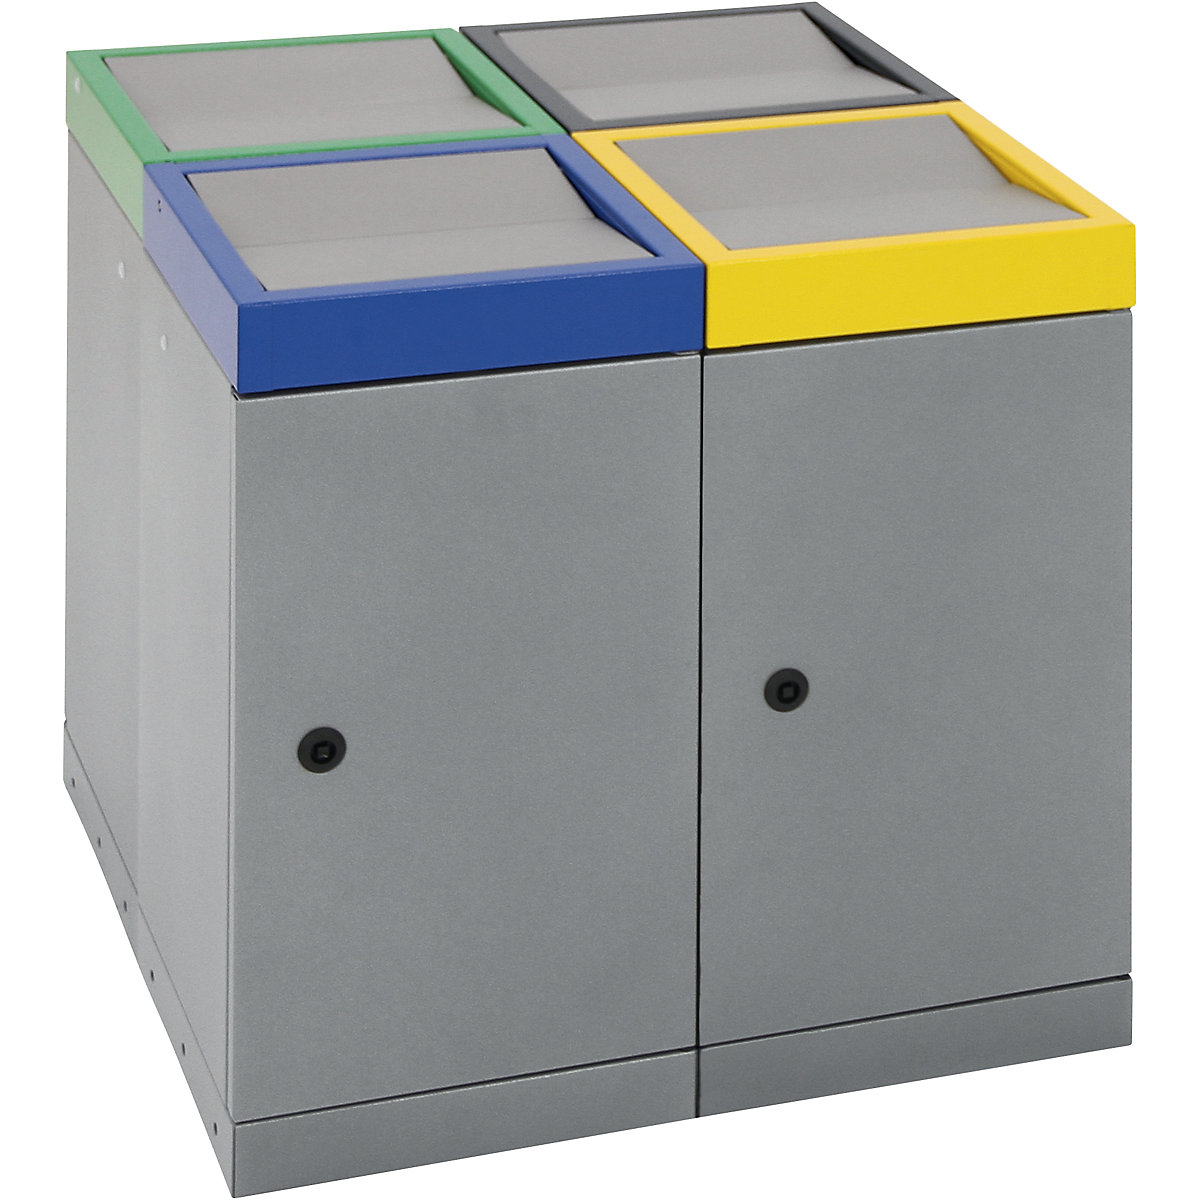 Swing lid recyclable waste collector, capacity 30 l, 4 compartment collector-1